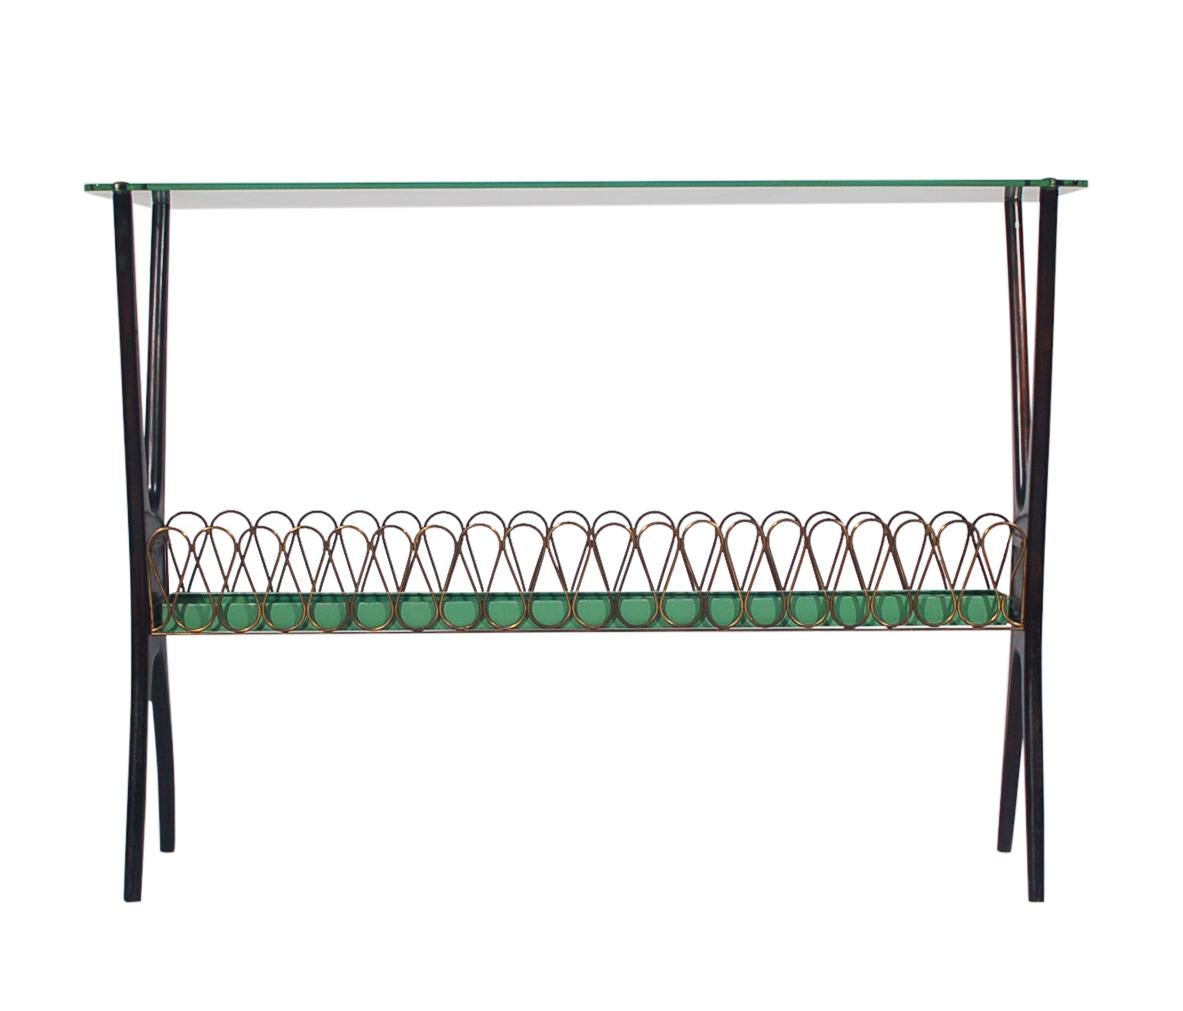 A shallow depth Italian console or hall table designed by Cesare Lacca and made in Italy, circa 1950s. It features a slim solid walnut frame with floating glass top and lower planter area.